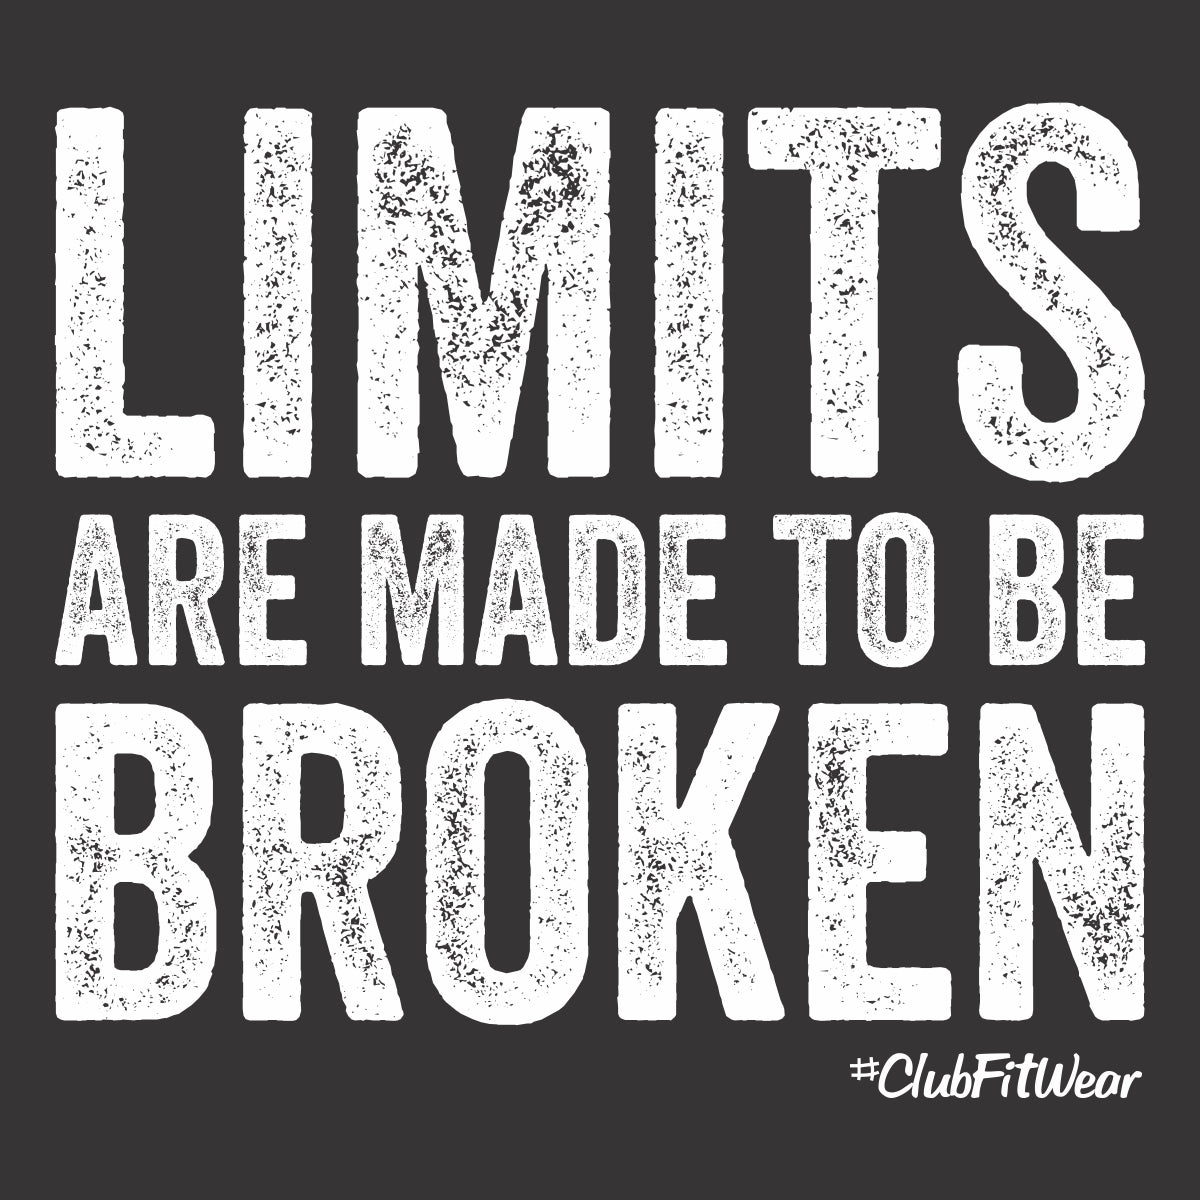 Limits are made to be Broken